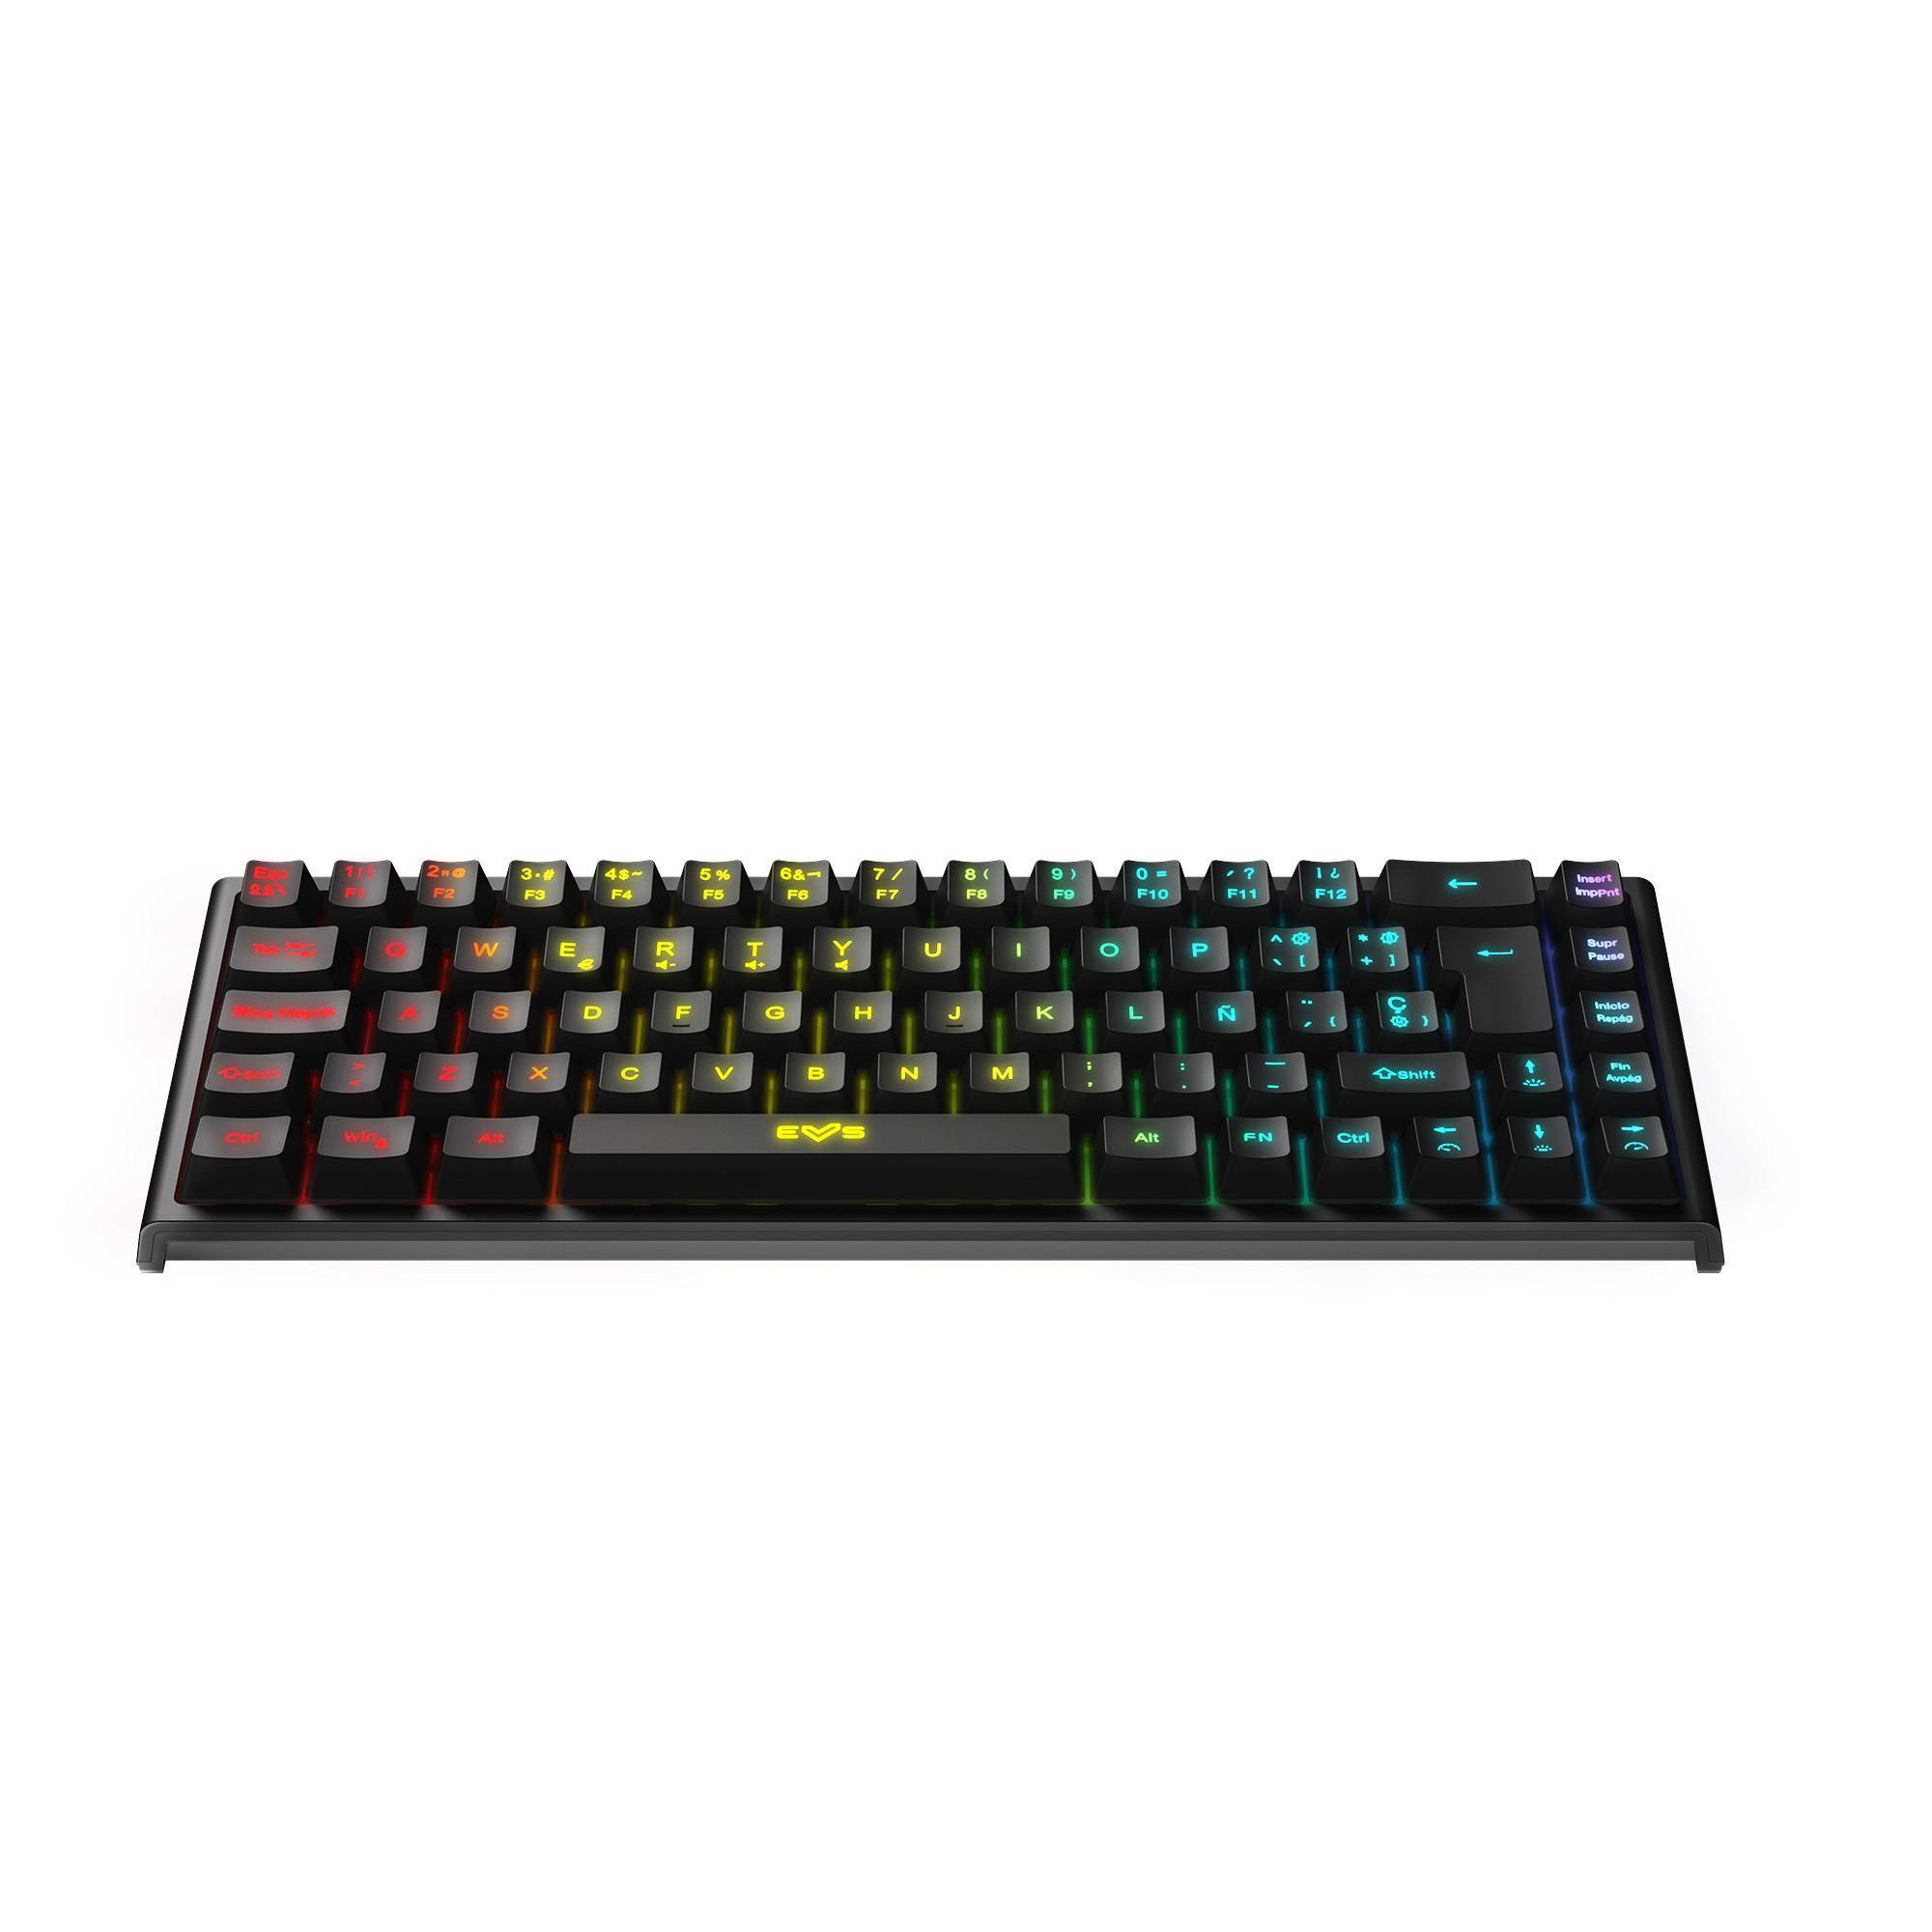 Compact wireless gaming keyboard with 68 keys